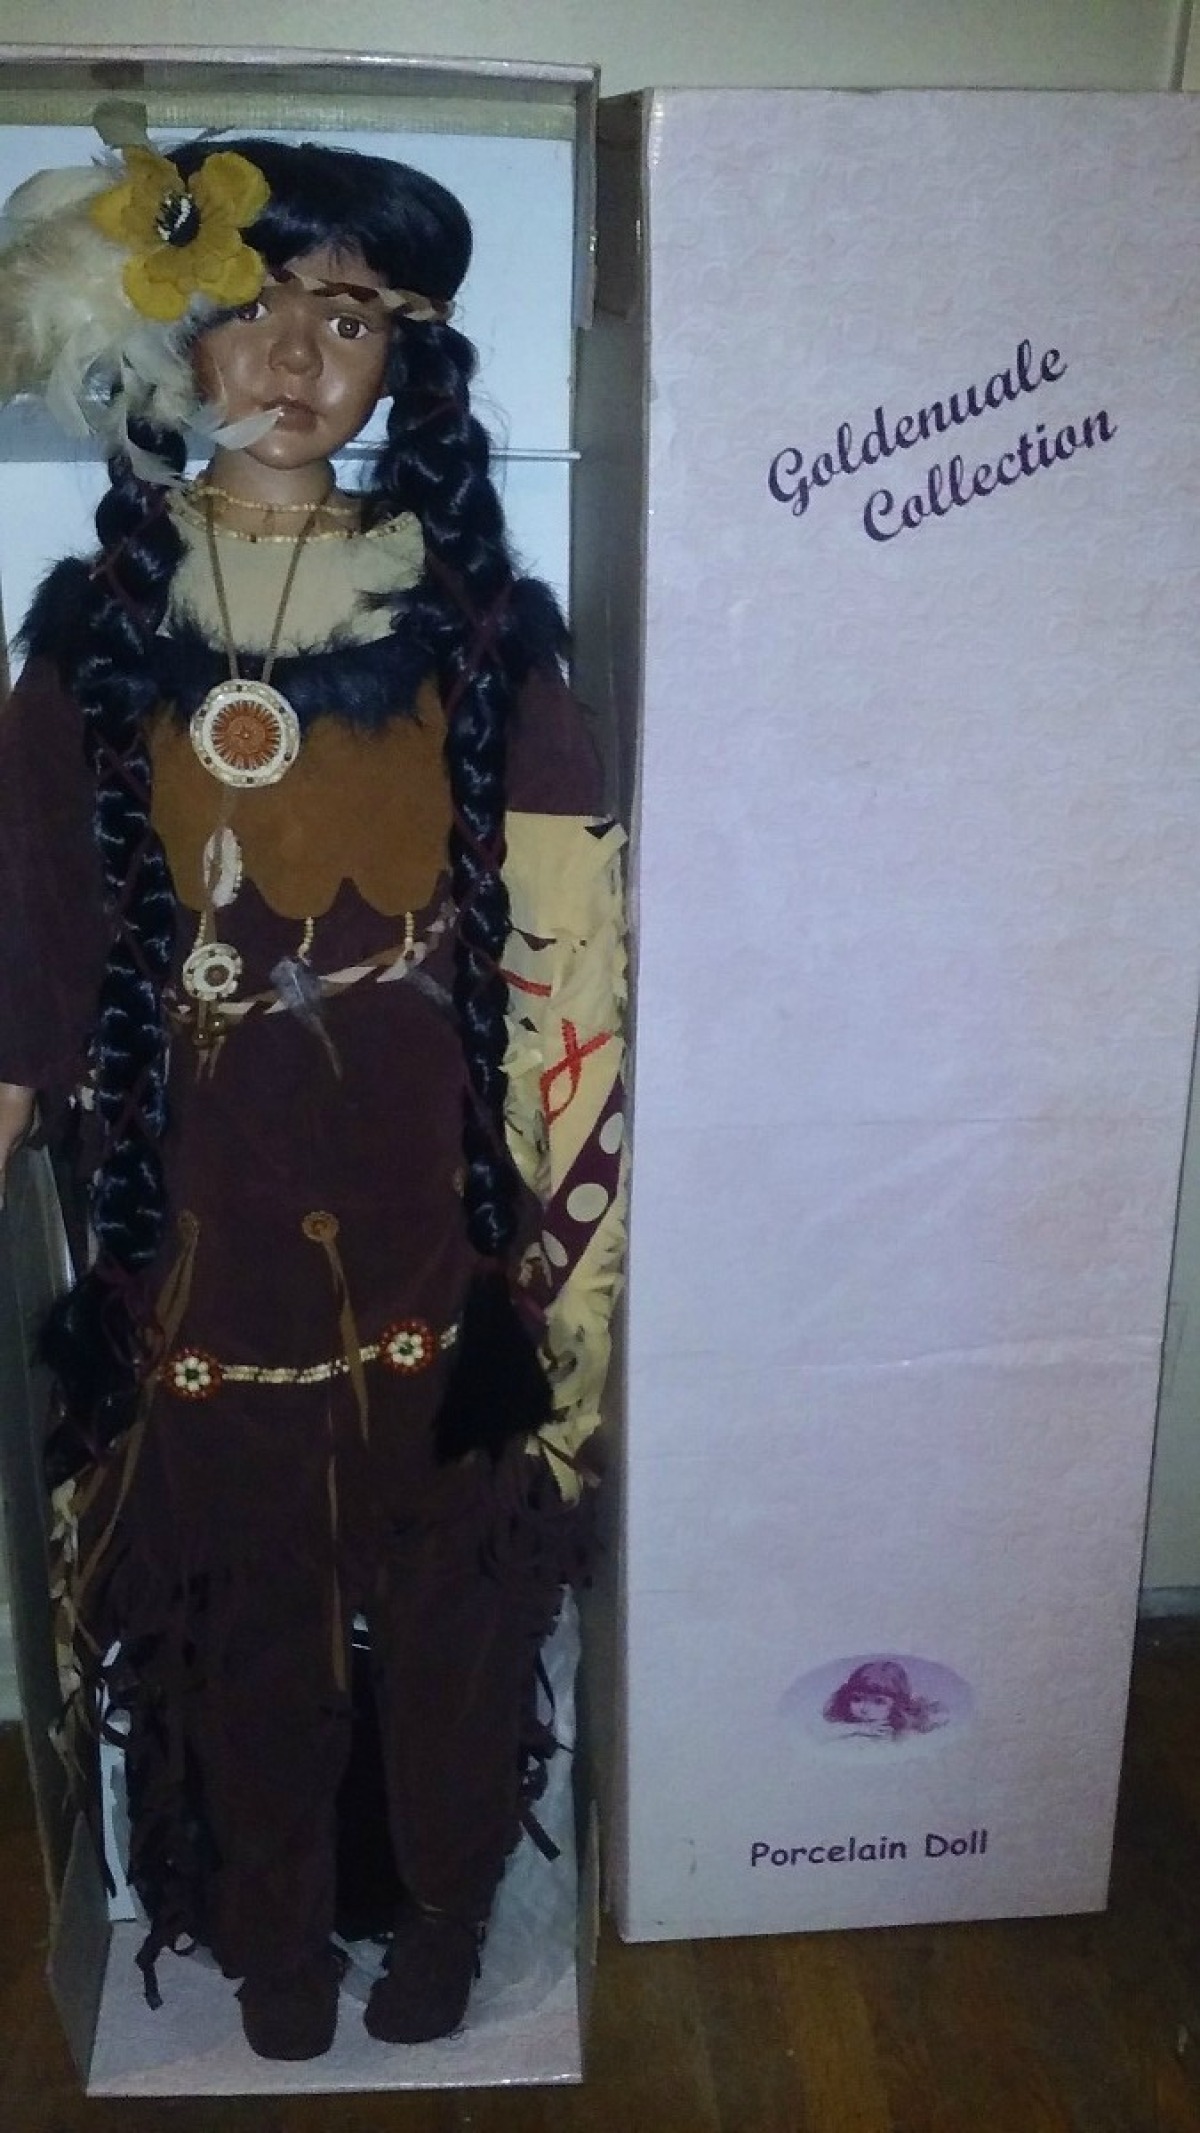 native american porcelain collectible dolls